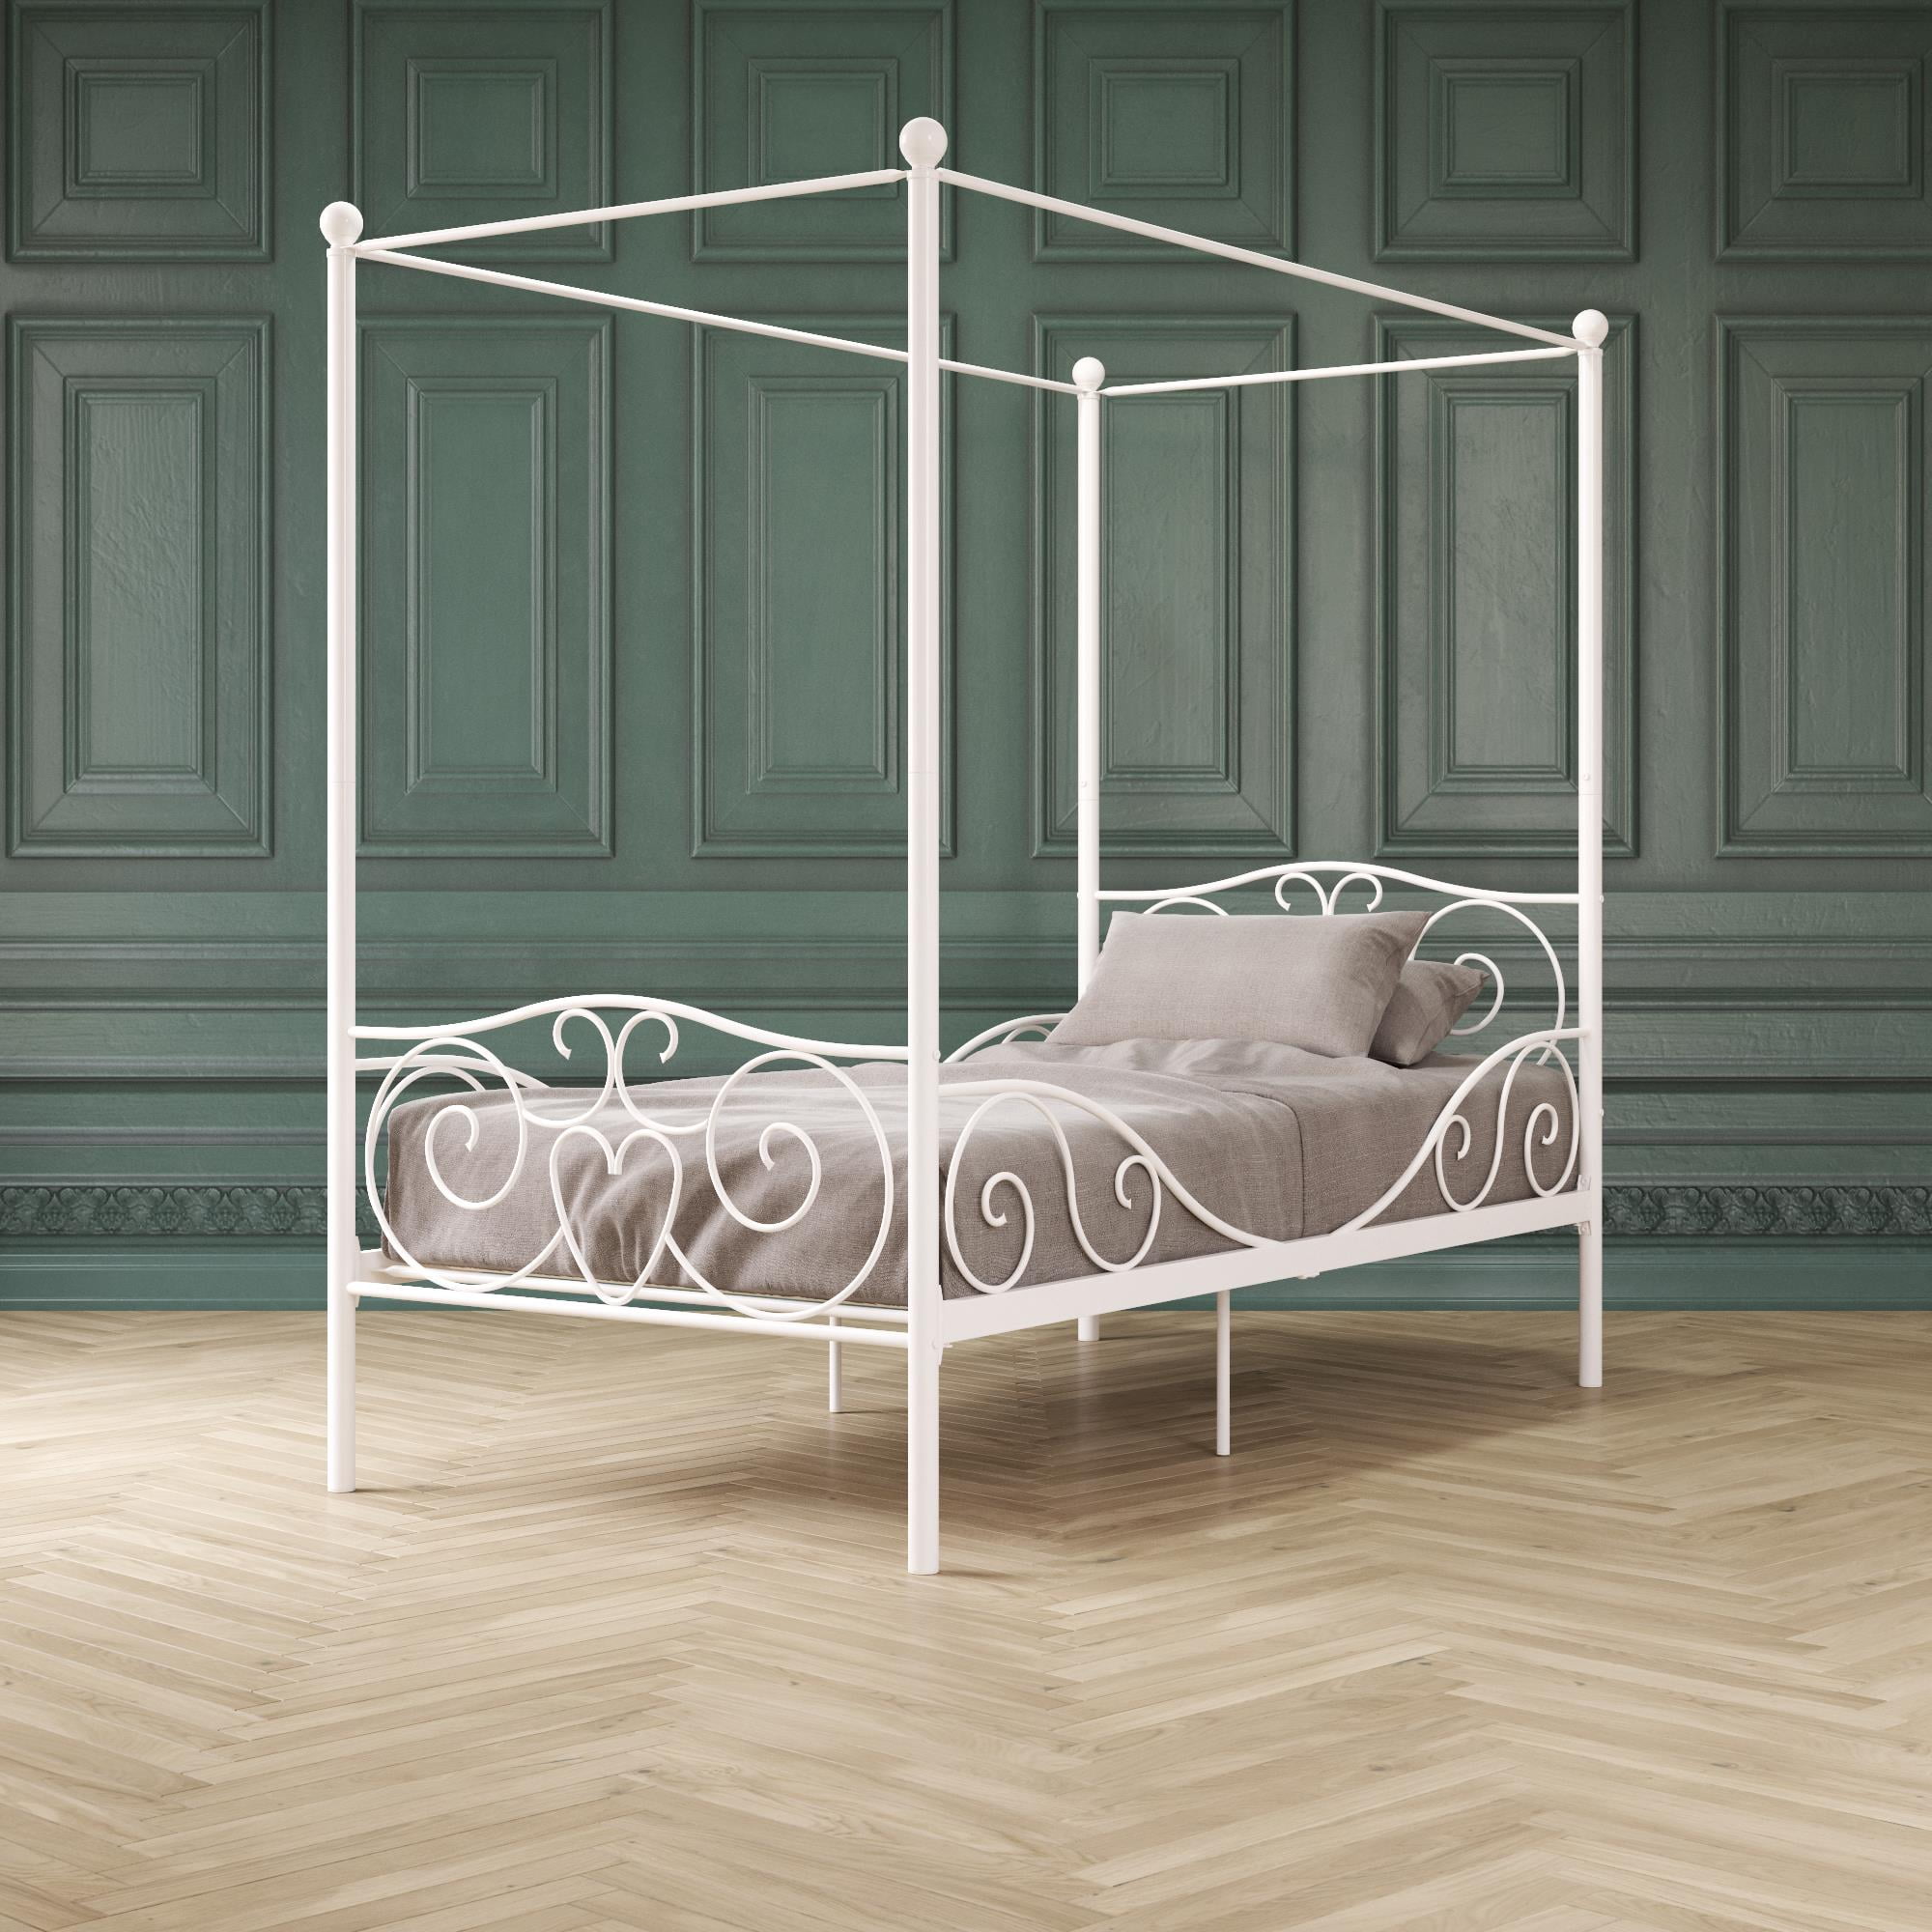 Oak Canopy Metal Bed Twin Size Frame, White Twin Canopy Bed Frame